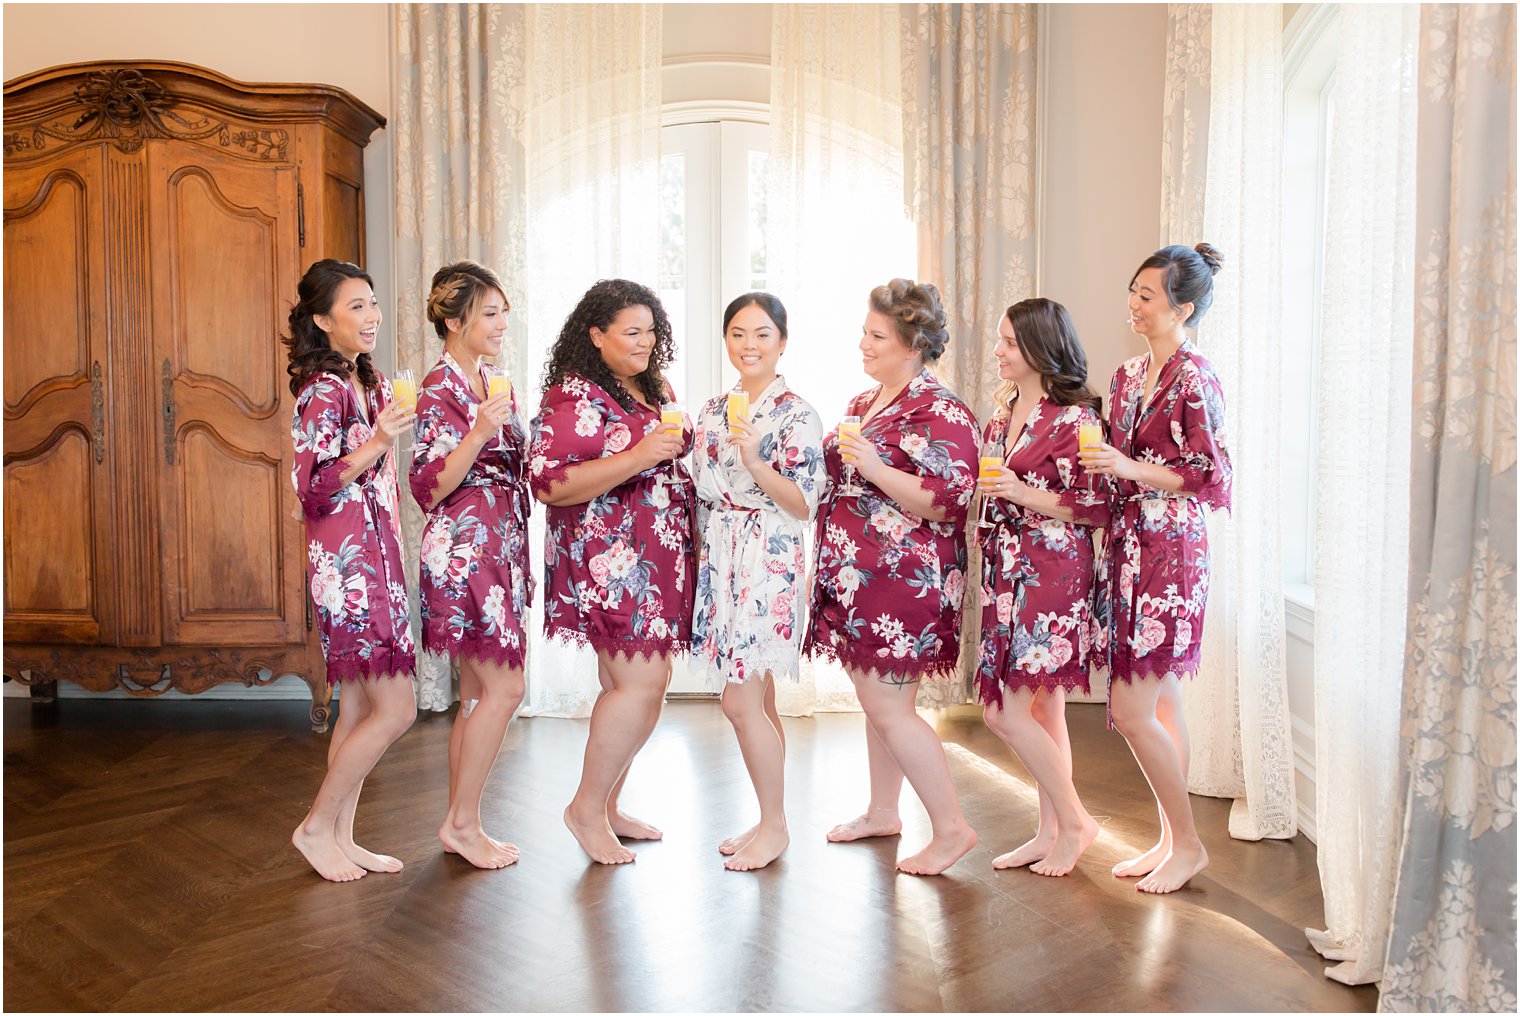 bridesmaids with mimosas prepare for wedding day in New Jersey